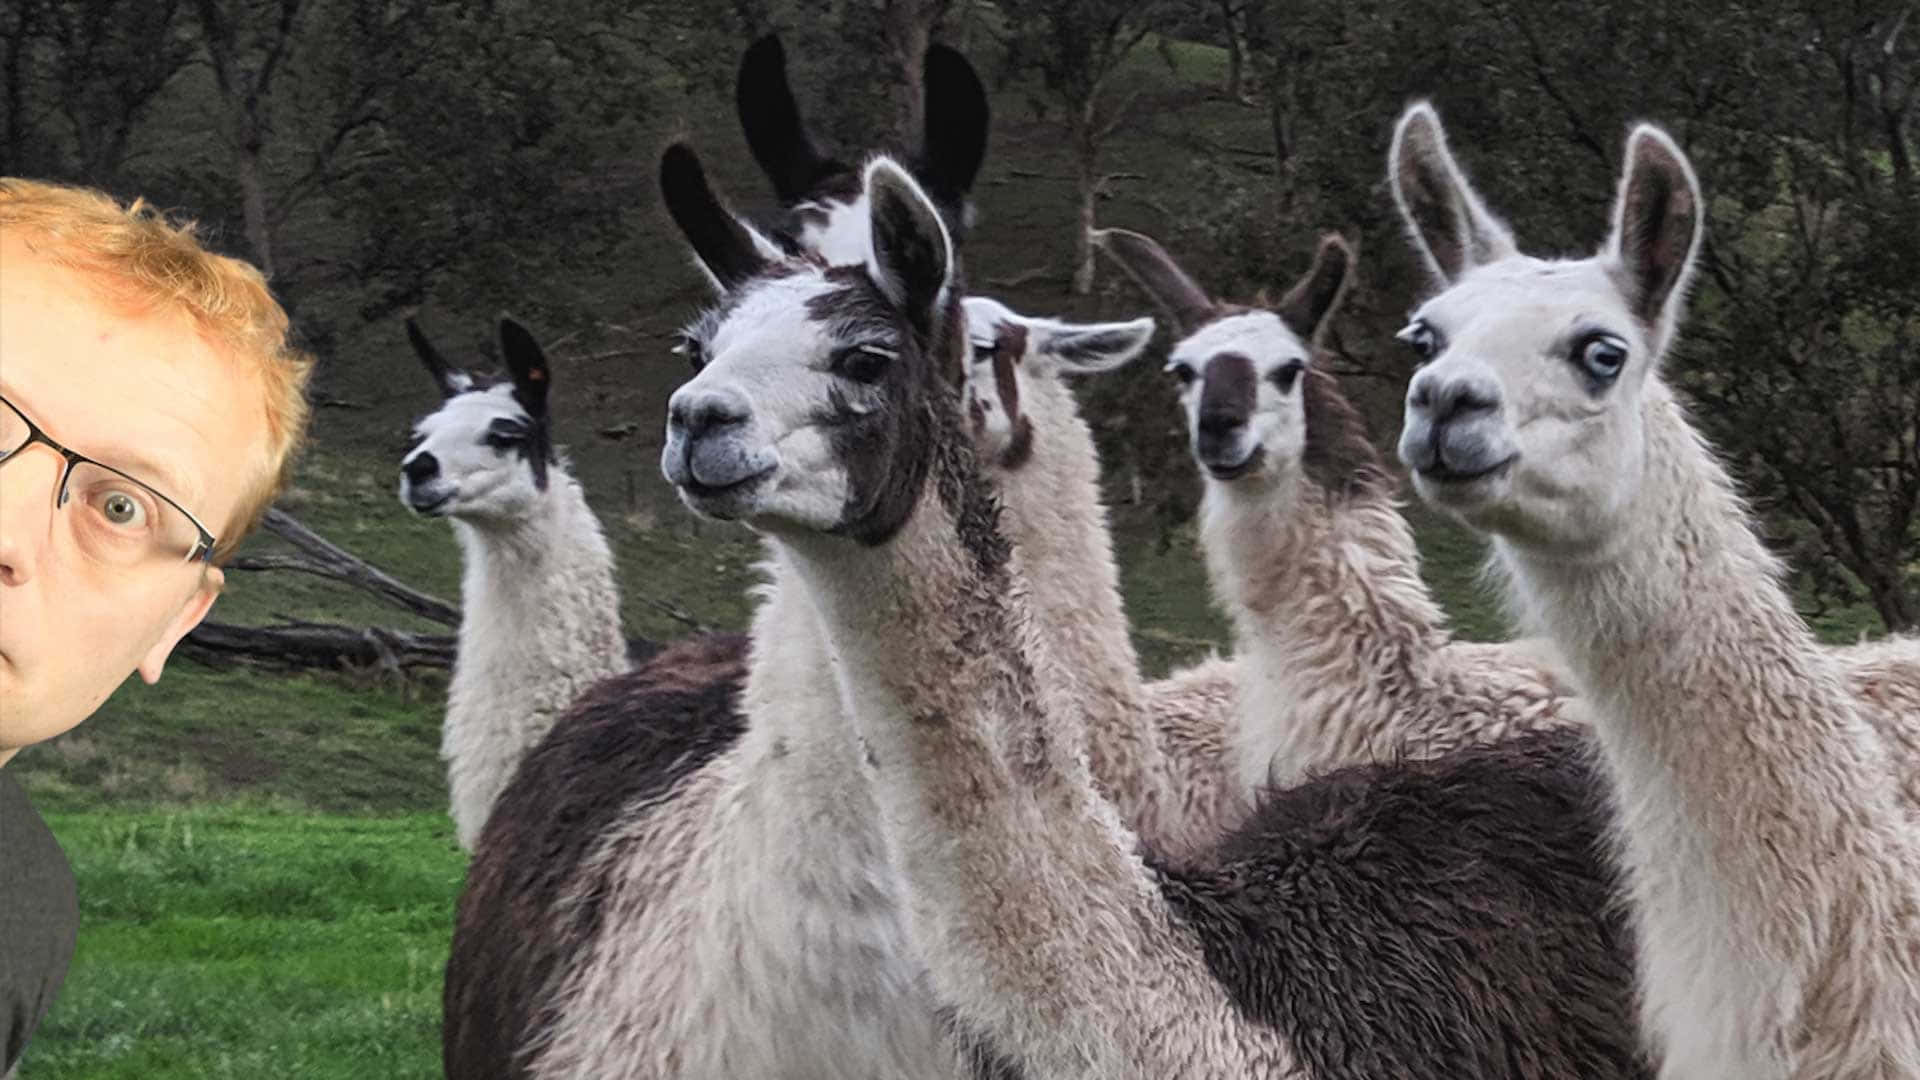 A Man With Glasses Is Standing In Front Of A Group Of Llamas